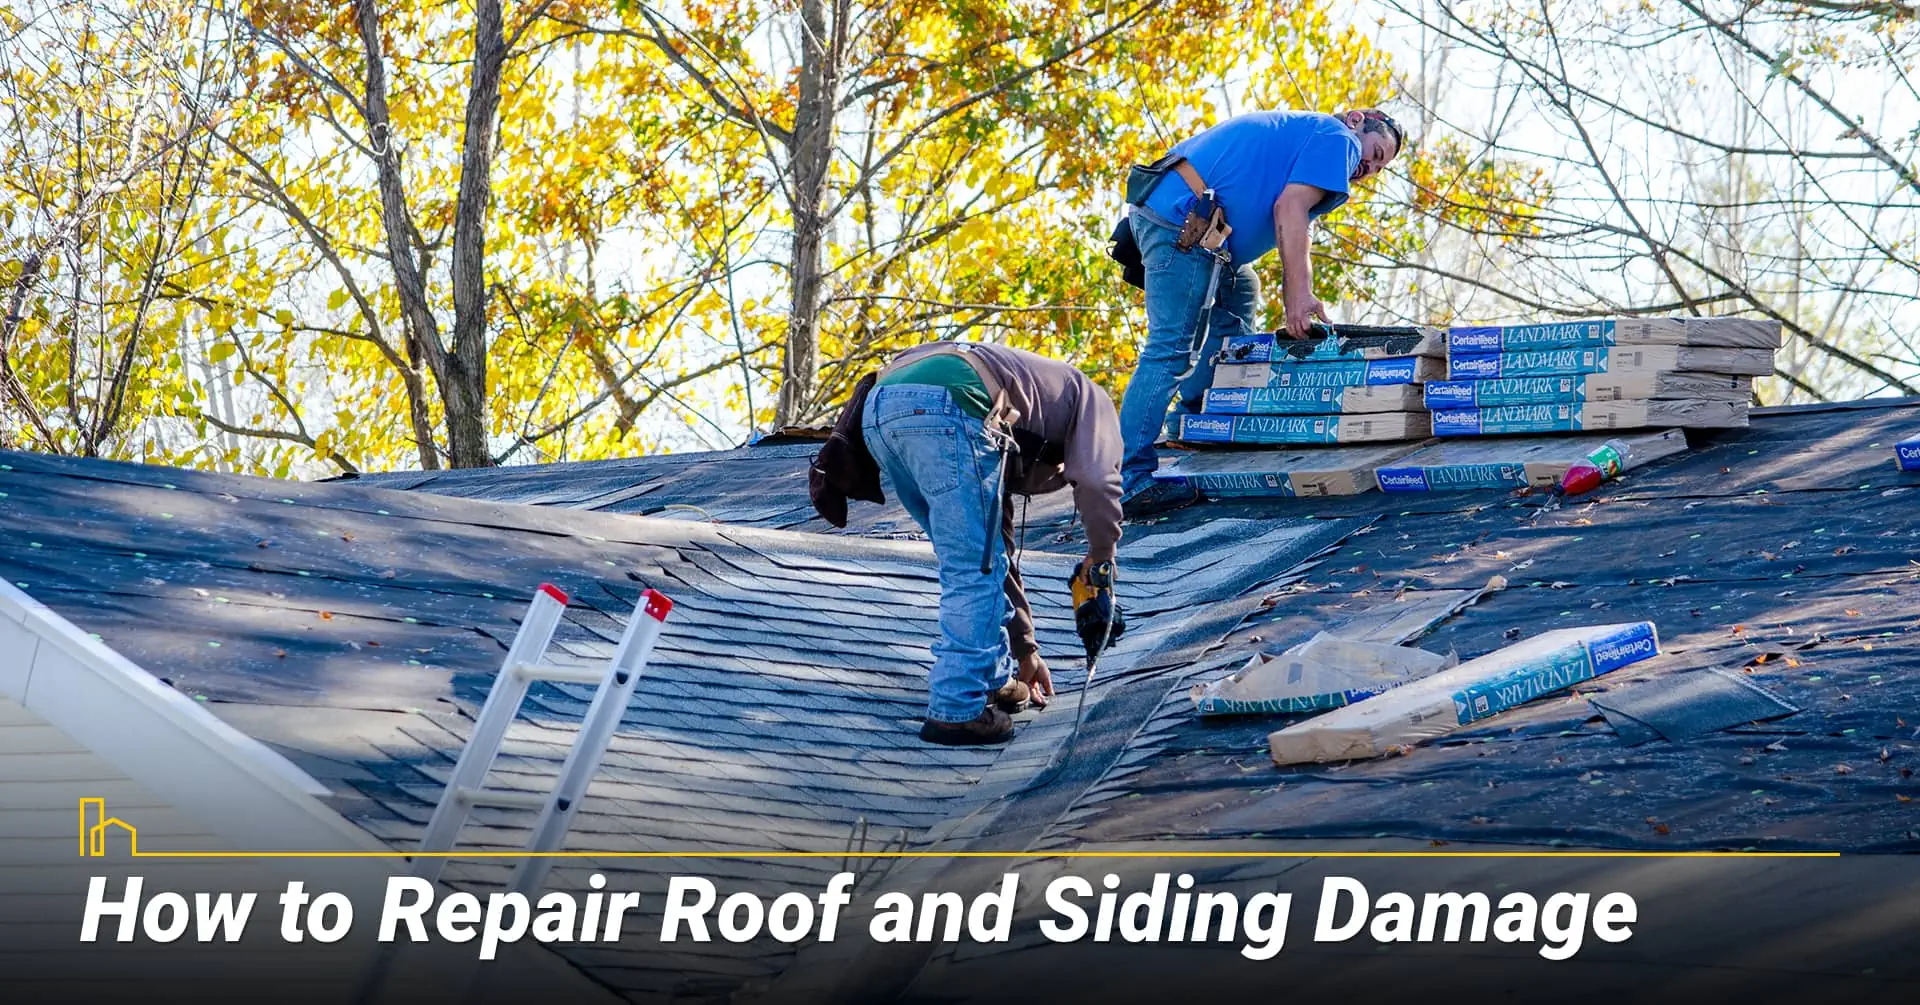 III. How to Repair Roof and Siding Damage